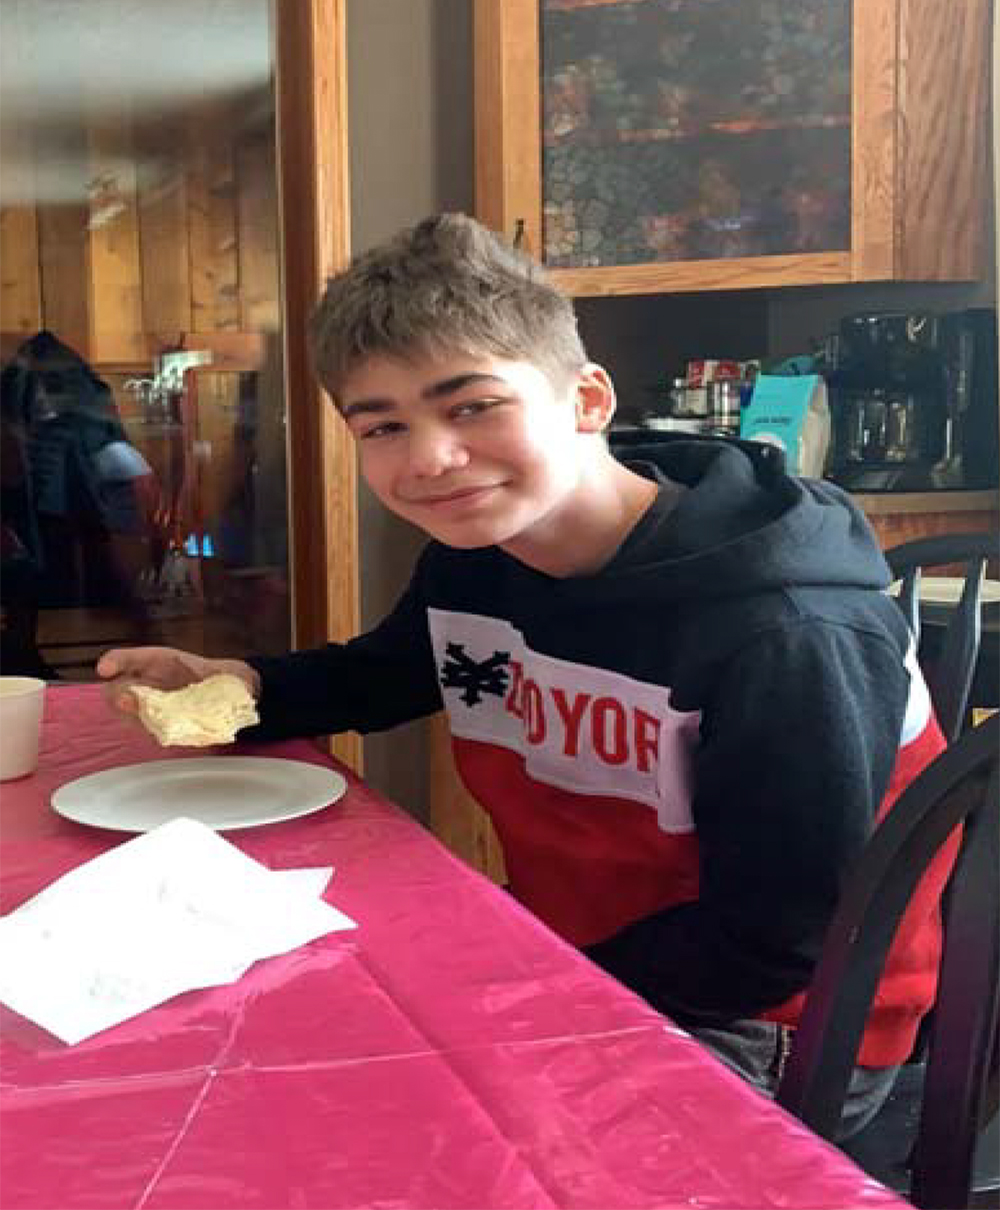 Search is on for missing 13-year-old from St.-Pierre-Jolys - image